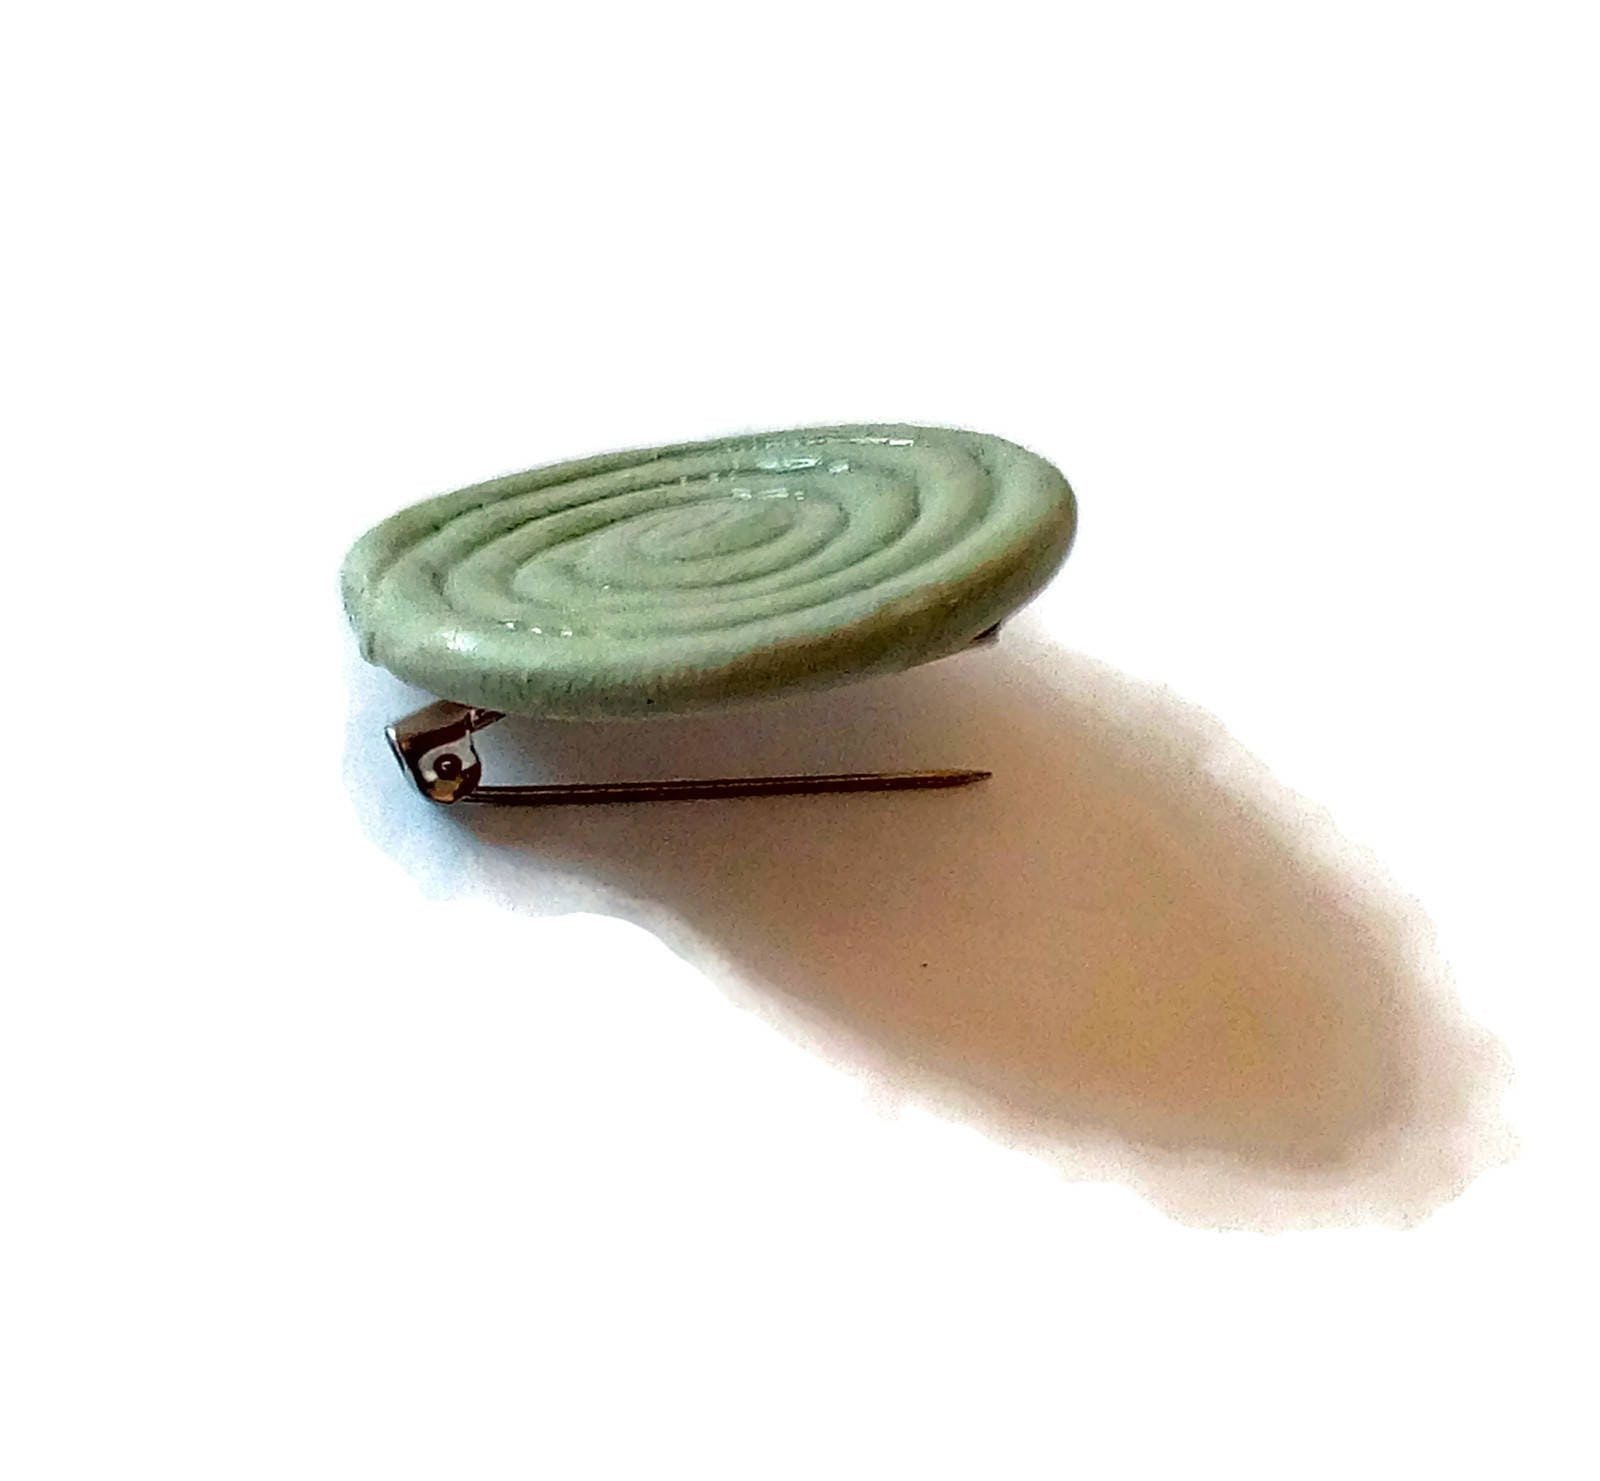 Handmade Ceramic Brooch Pin, Green Spiral Brooch, Mothers Day Gift For Grandma, Best Step Mom Birthday Gifts For Her - Ceramica Ana Rafael